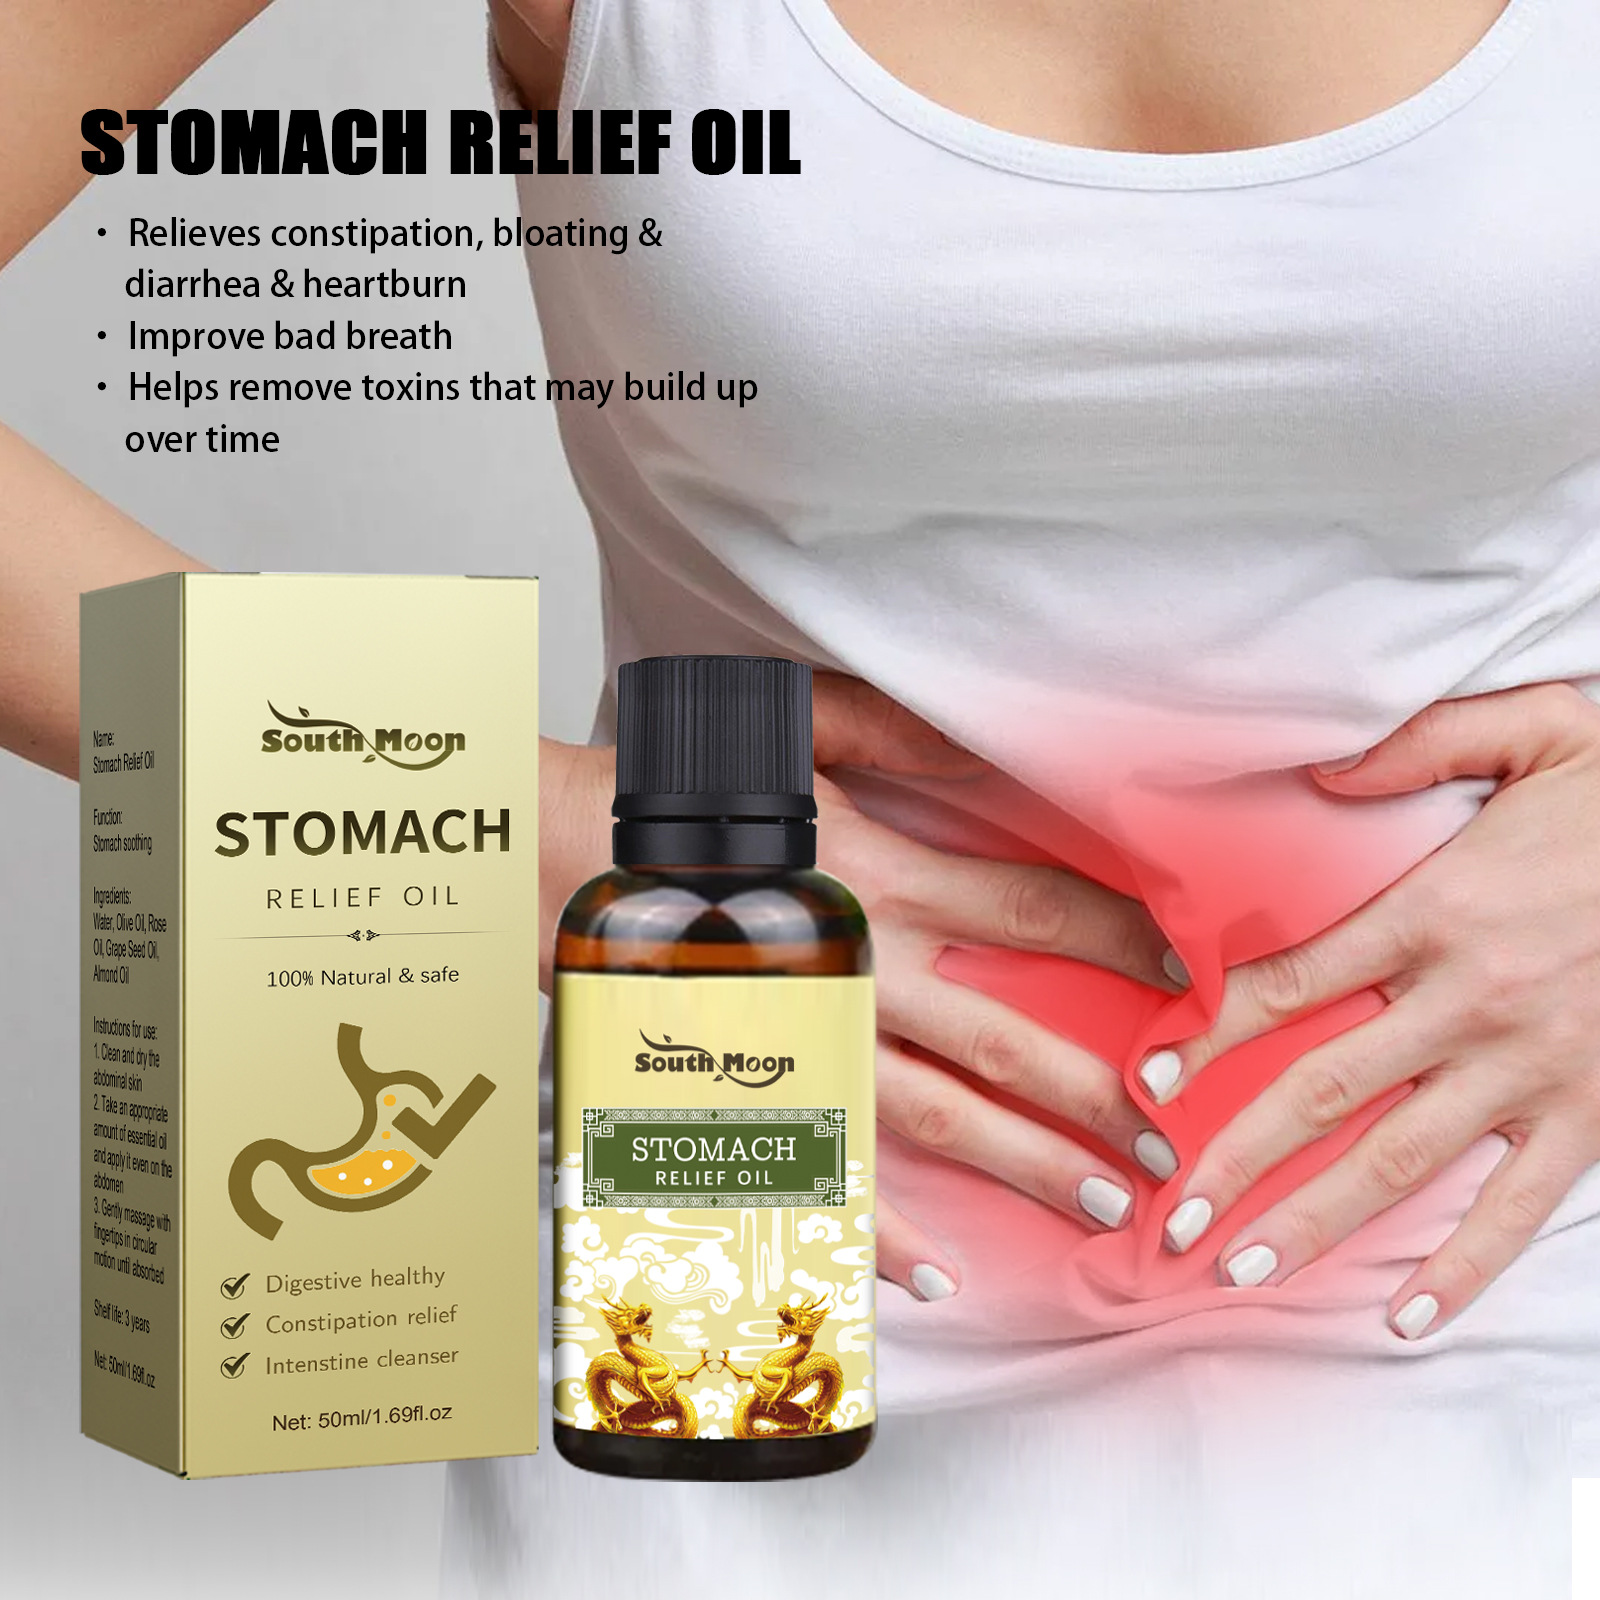 South Moon Stomach Oil Abdominal Massage Treatment Oil Clear Excrement Left in Body Relieve Gastrointestinal Discomfort Firming Slimming Oil